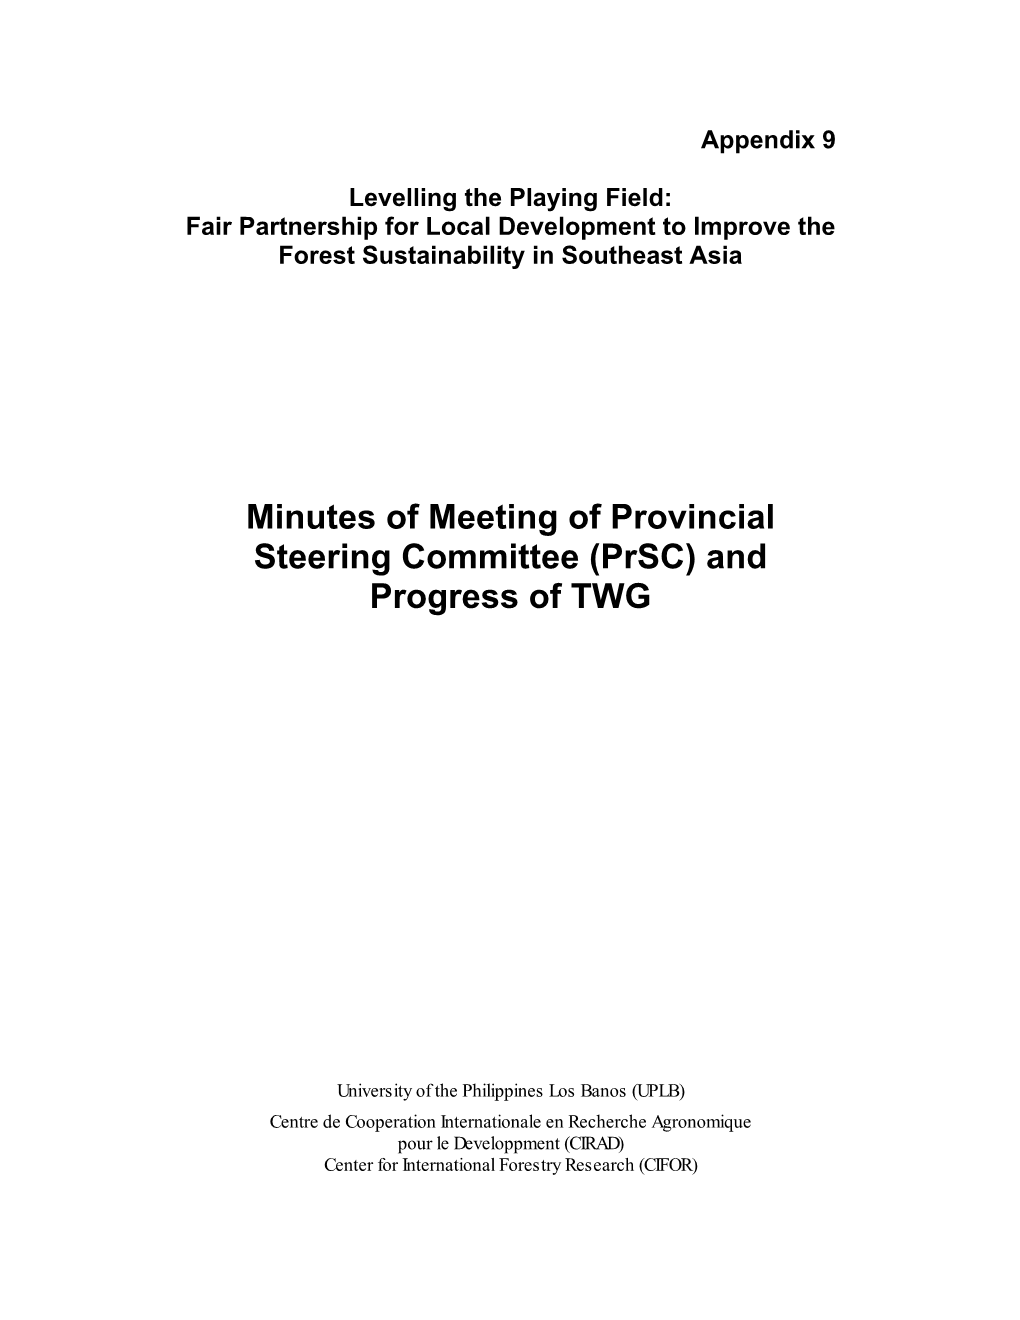 Minutes of Meeting of Provincial Steering Committee (Prsc) and Progress of TWG